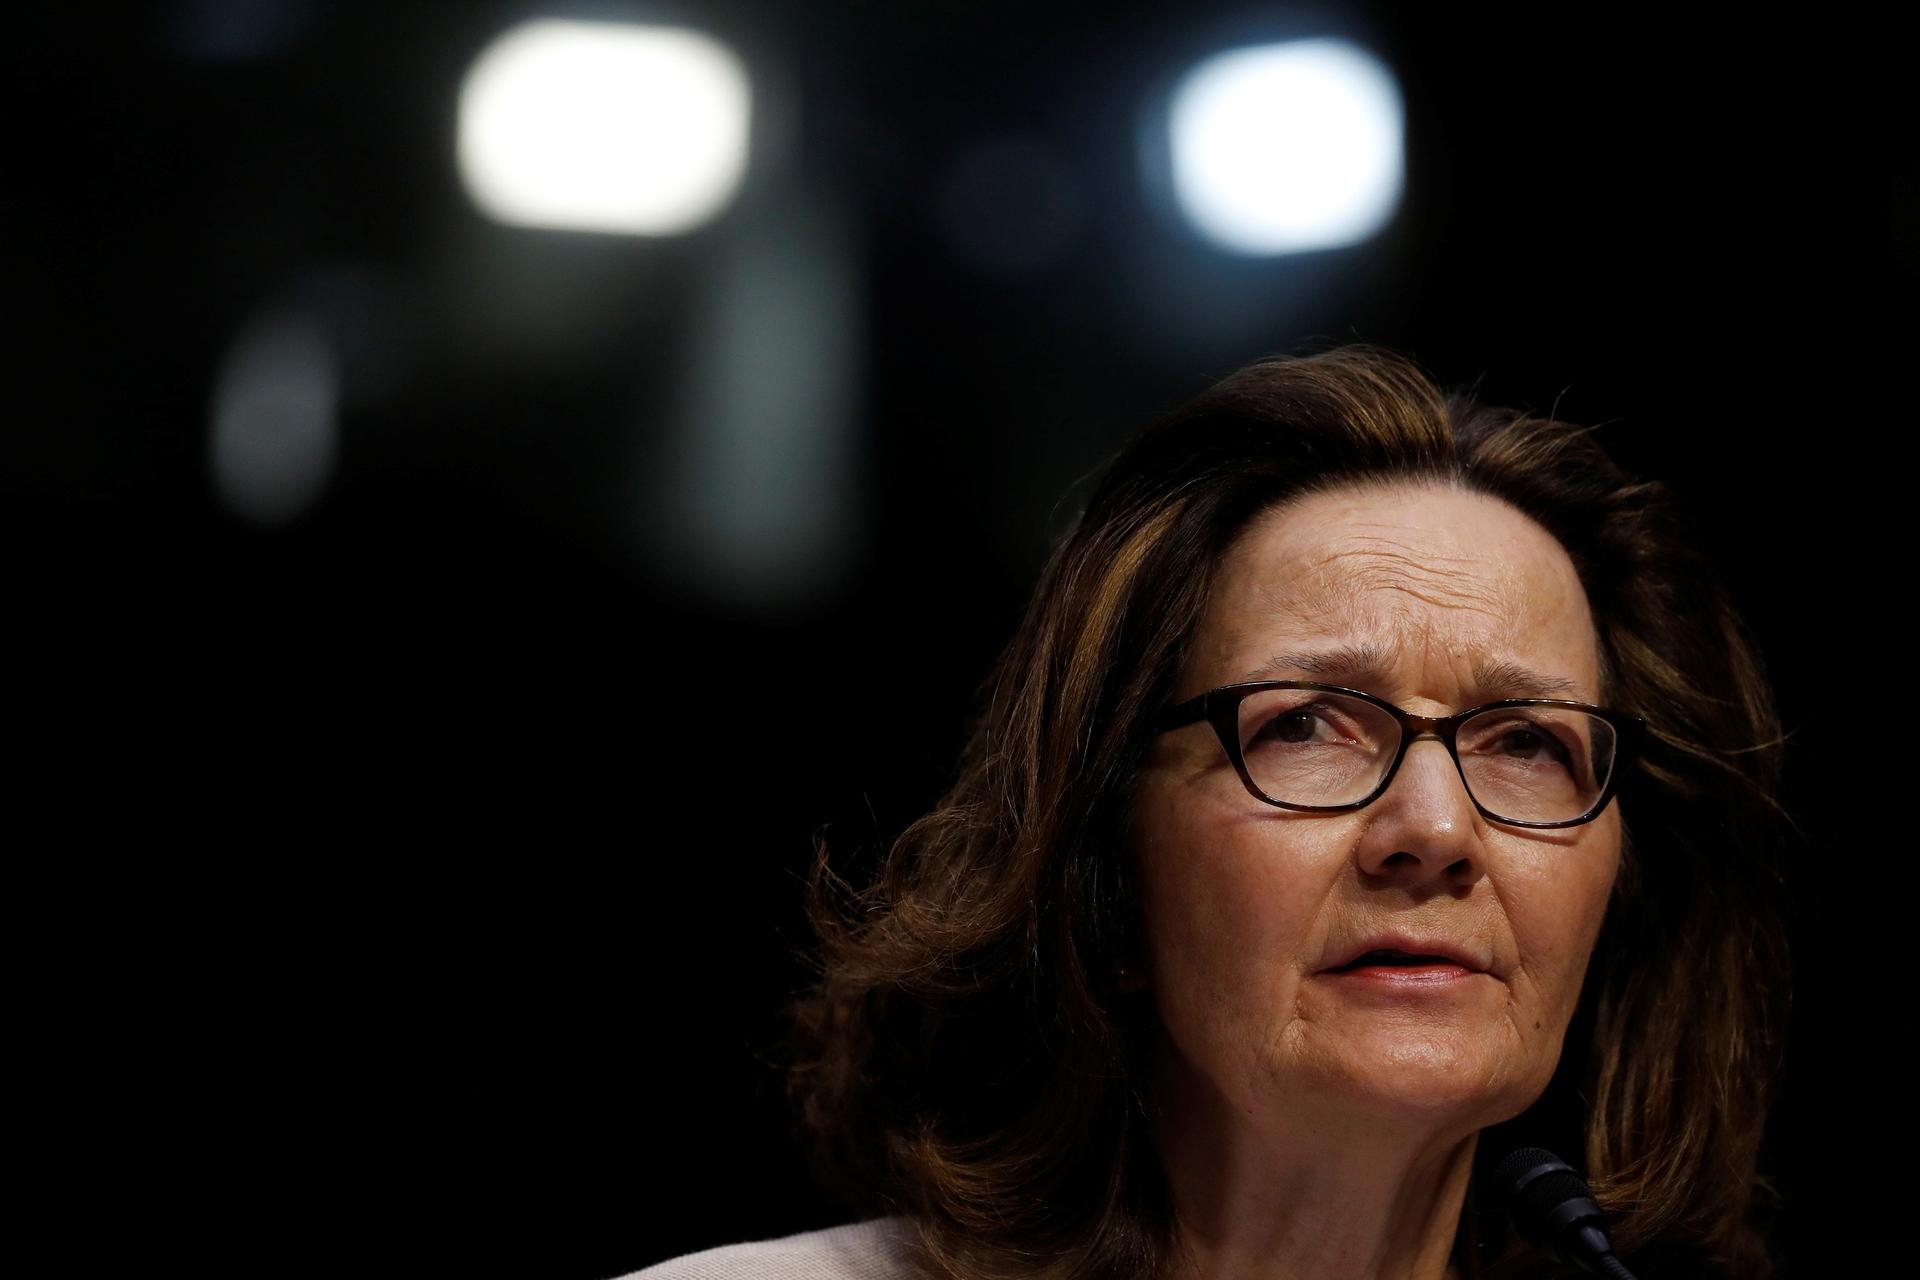 CIA Director Gina Haspel, wearing dark rimmed glasses, looks right in the medium cropped portrait.